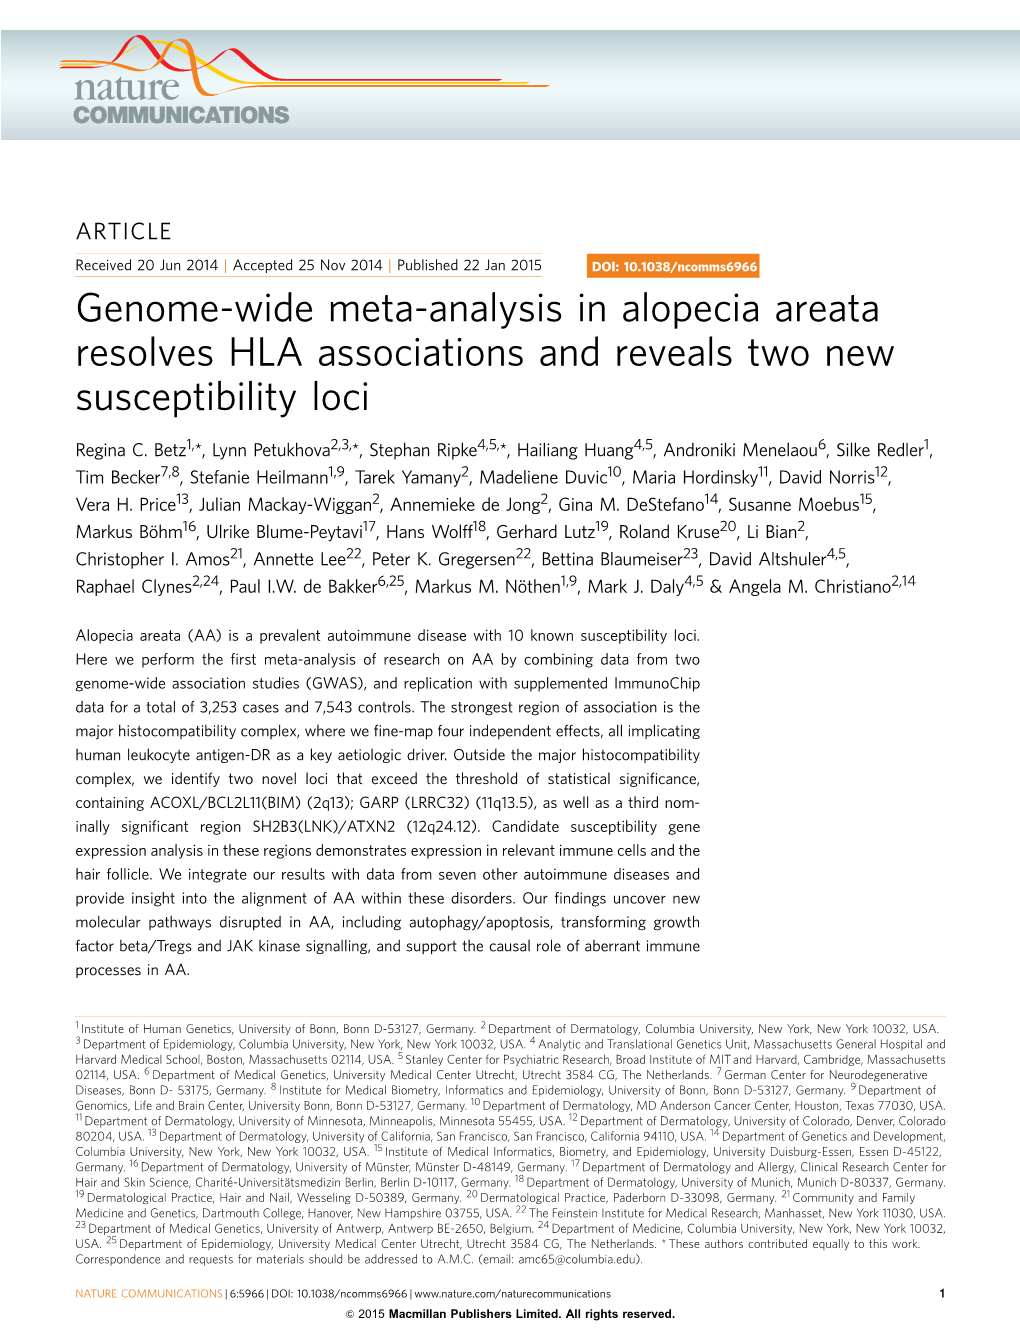 Genome-Wide Meta-Analysis in Alopecia Areata Resolves HLA Associations and Reveals Two New Susceptibility Loci